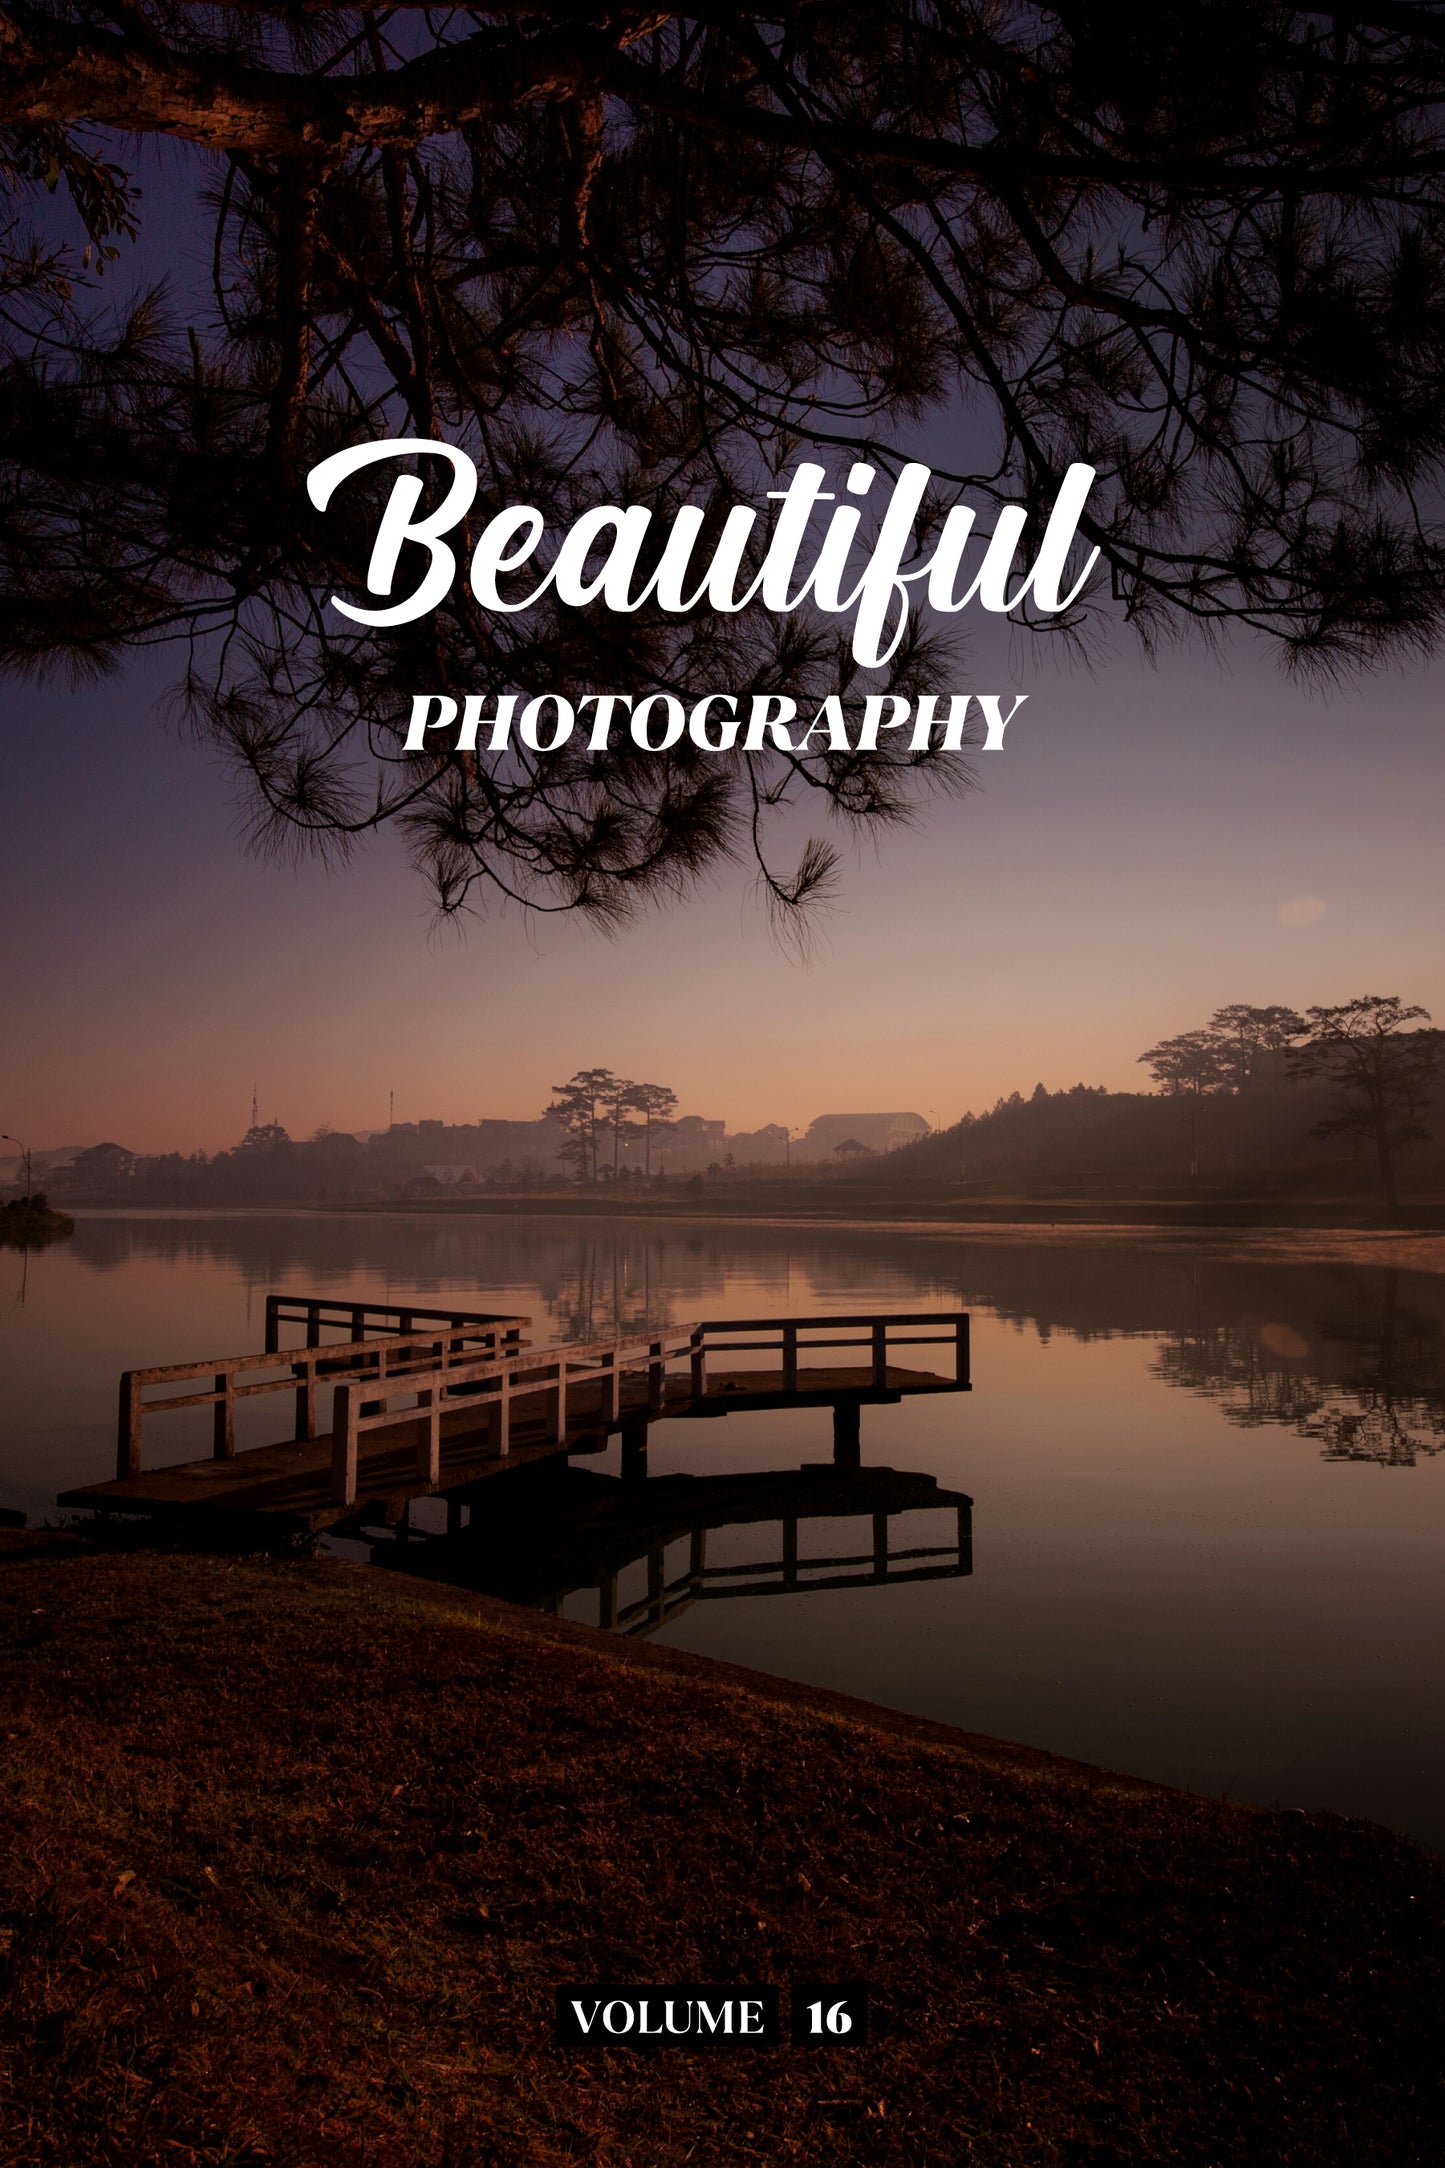 Beautiful Photography Volume 16 (Physical Book Pre-Order)